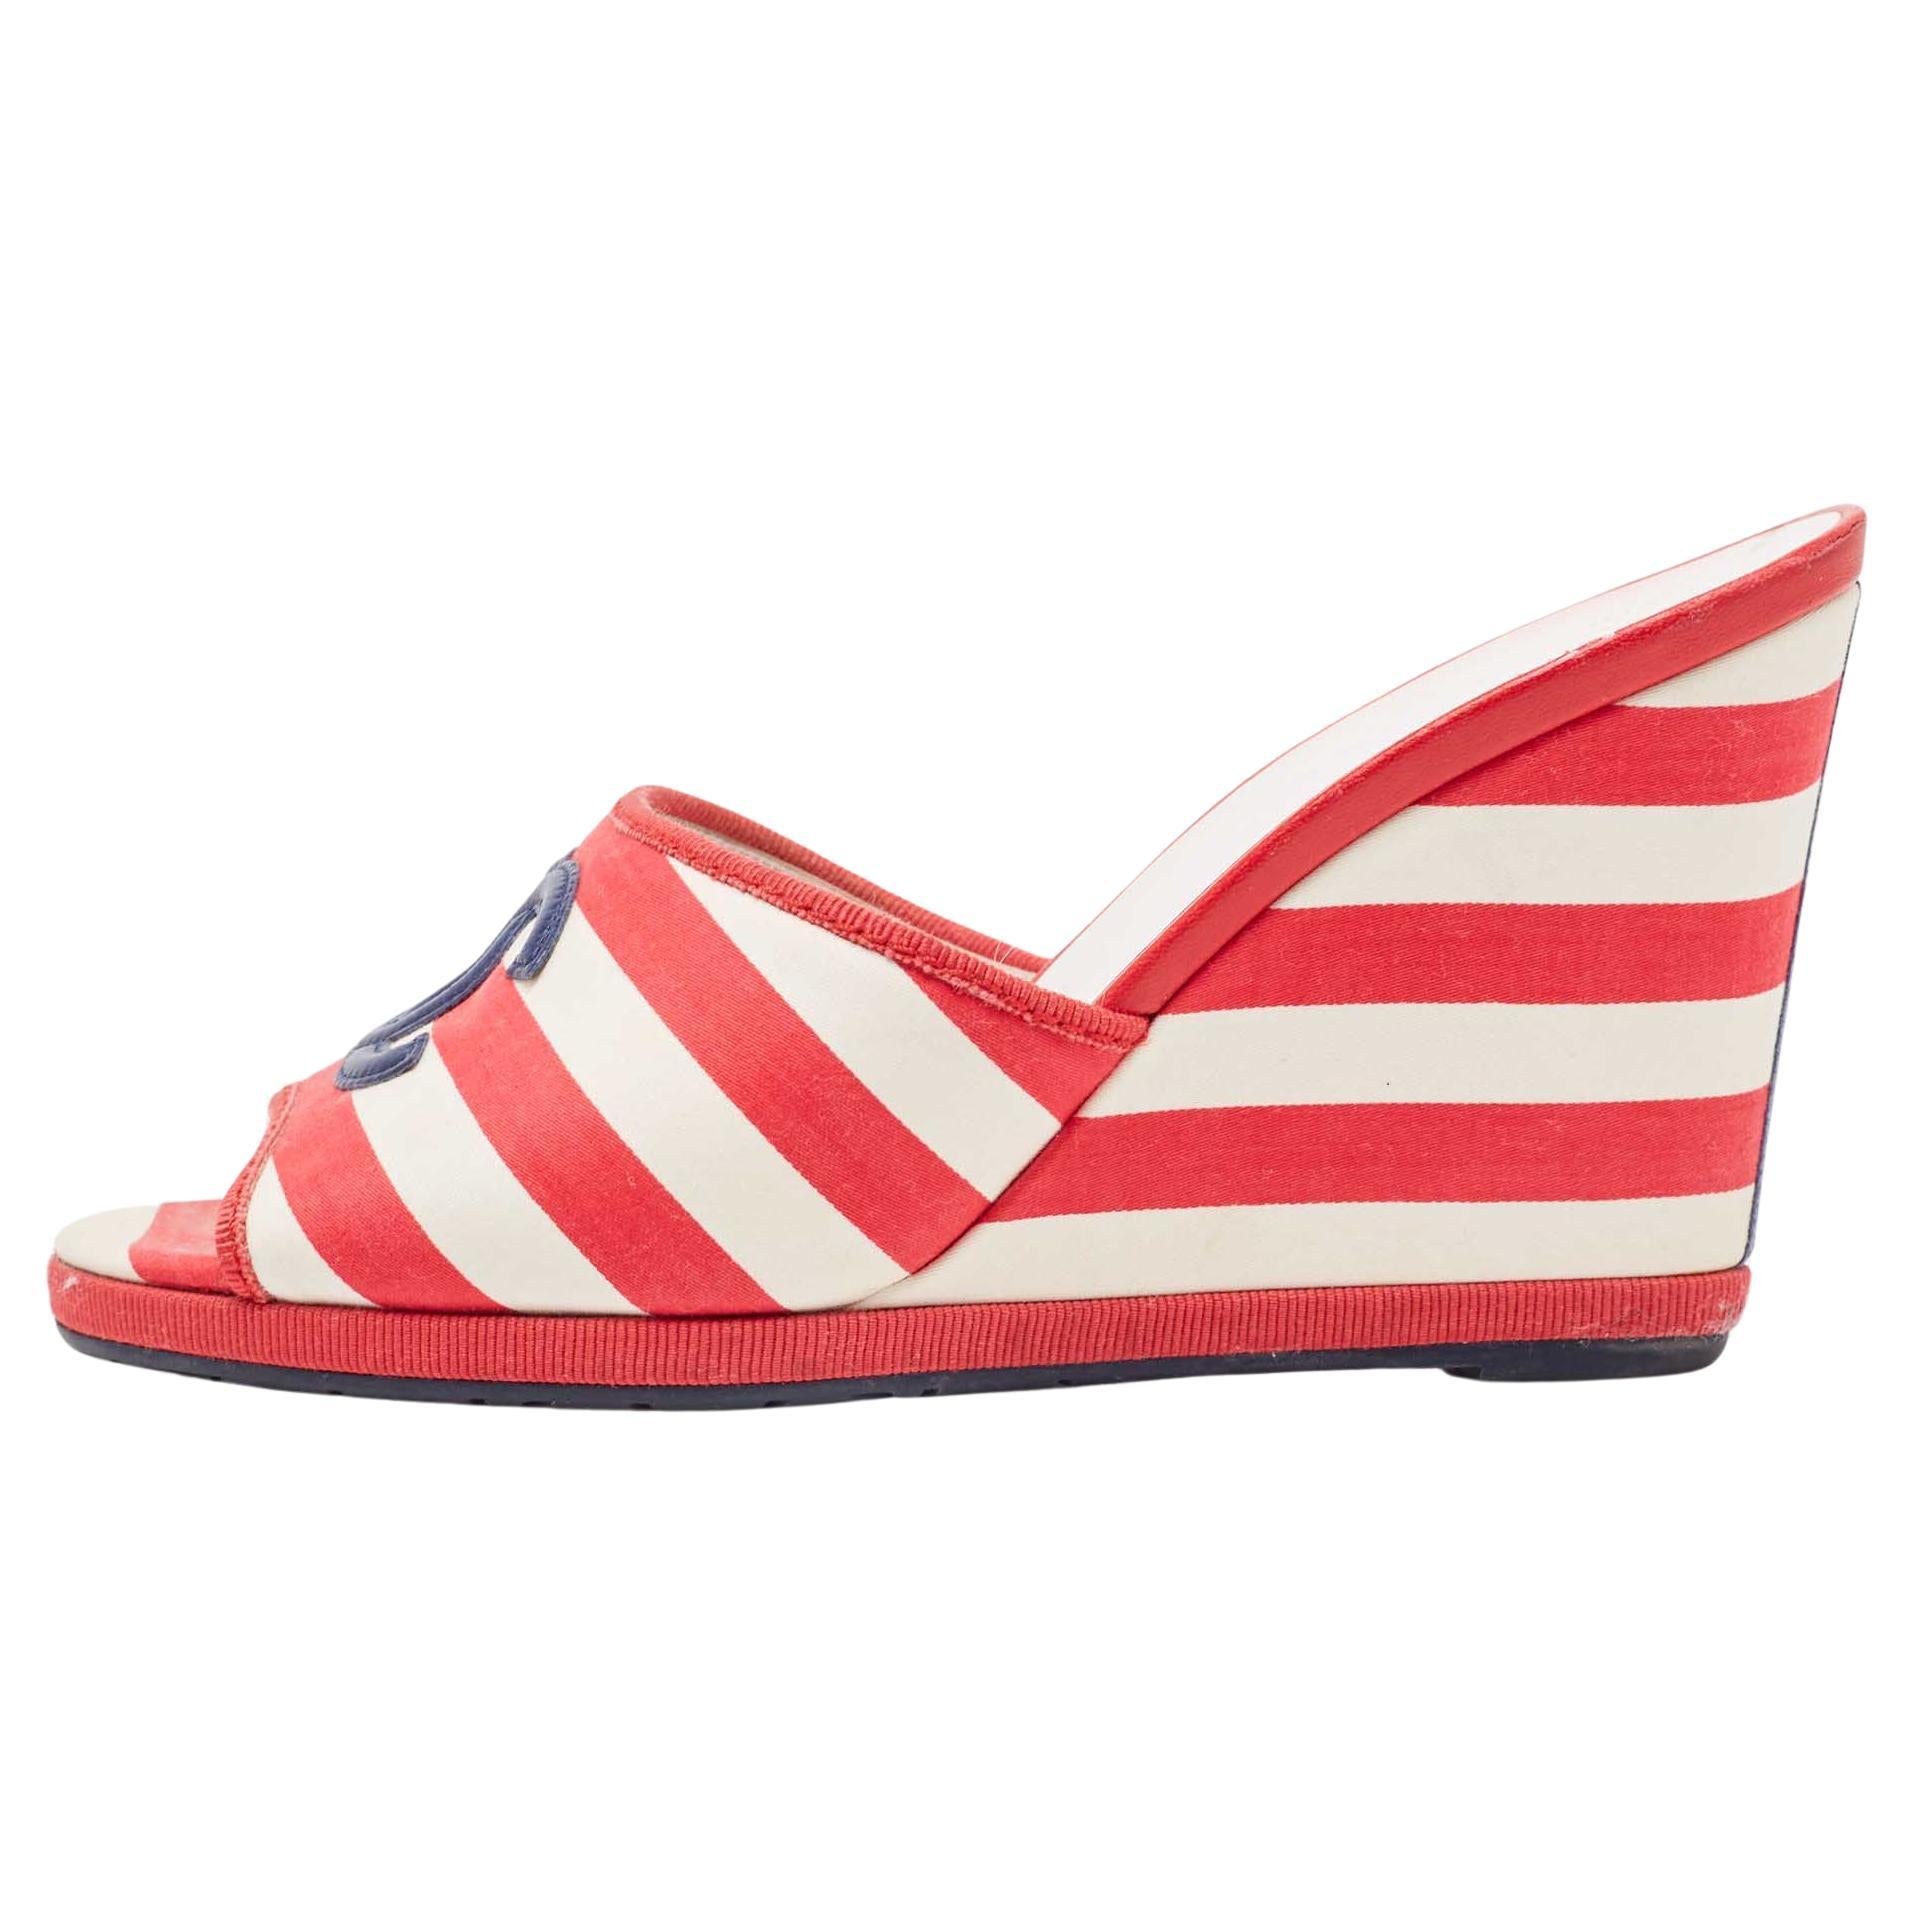 Chanel Red/White Canvas CC Stripe Wedge Sandals Size 37